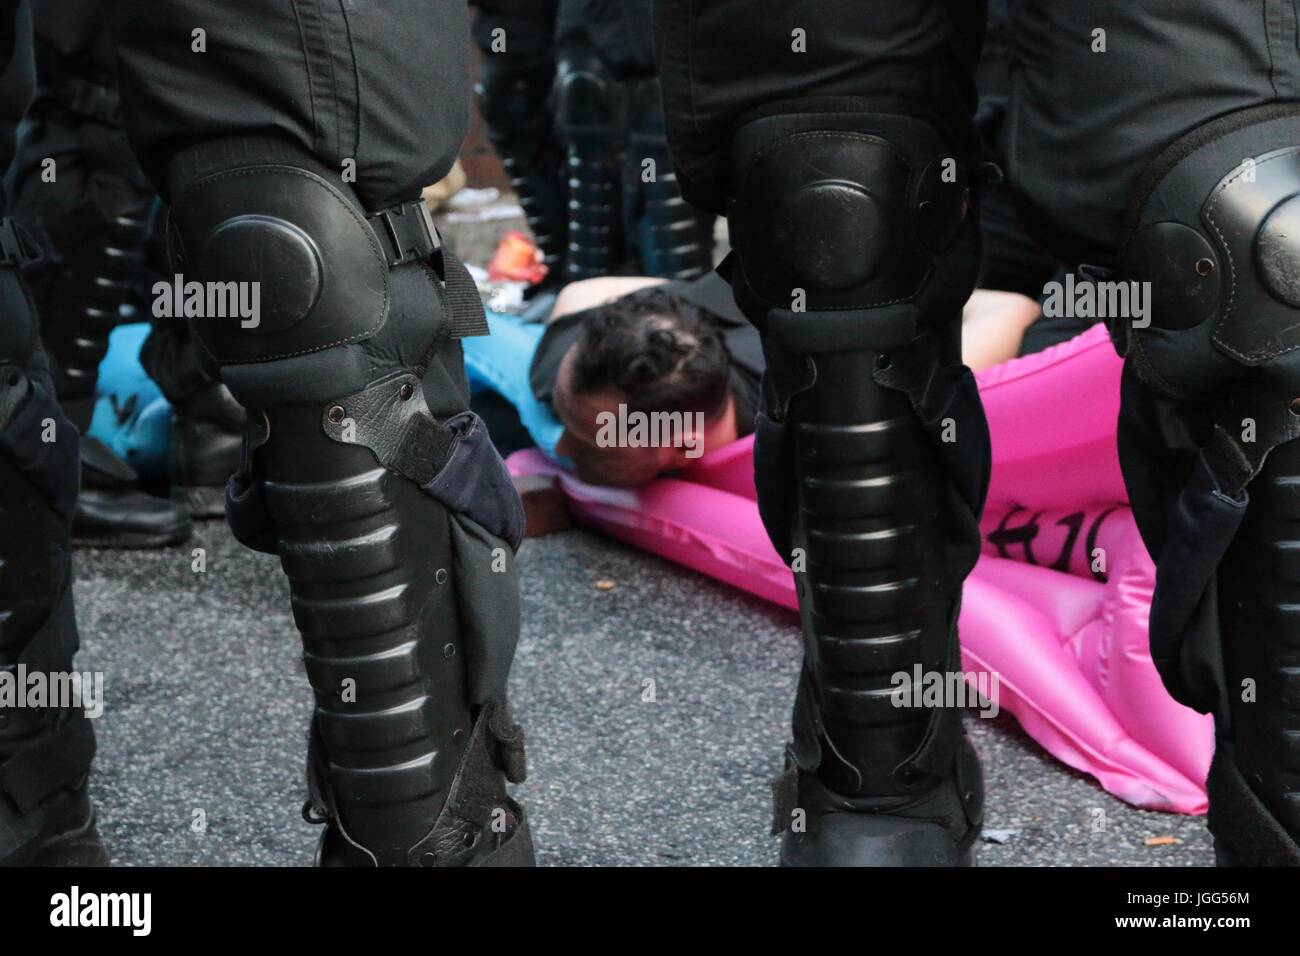 Hamburg, Germany. 6th July, 2017. A protester is arrested as violence breaks out at an anti g20 protest Credit: Conall Kearney/Alamy Live News Stock Photo